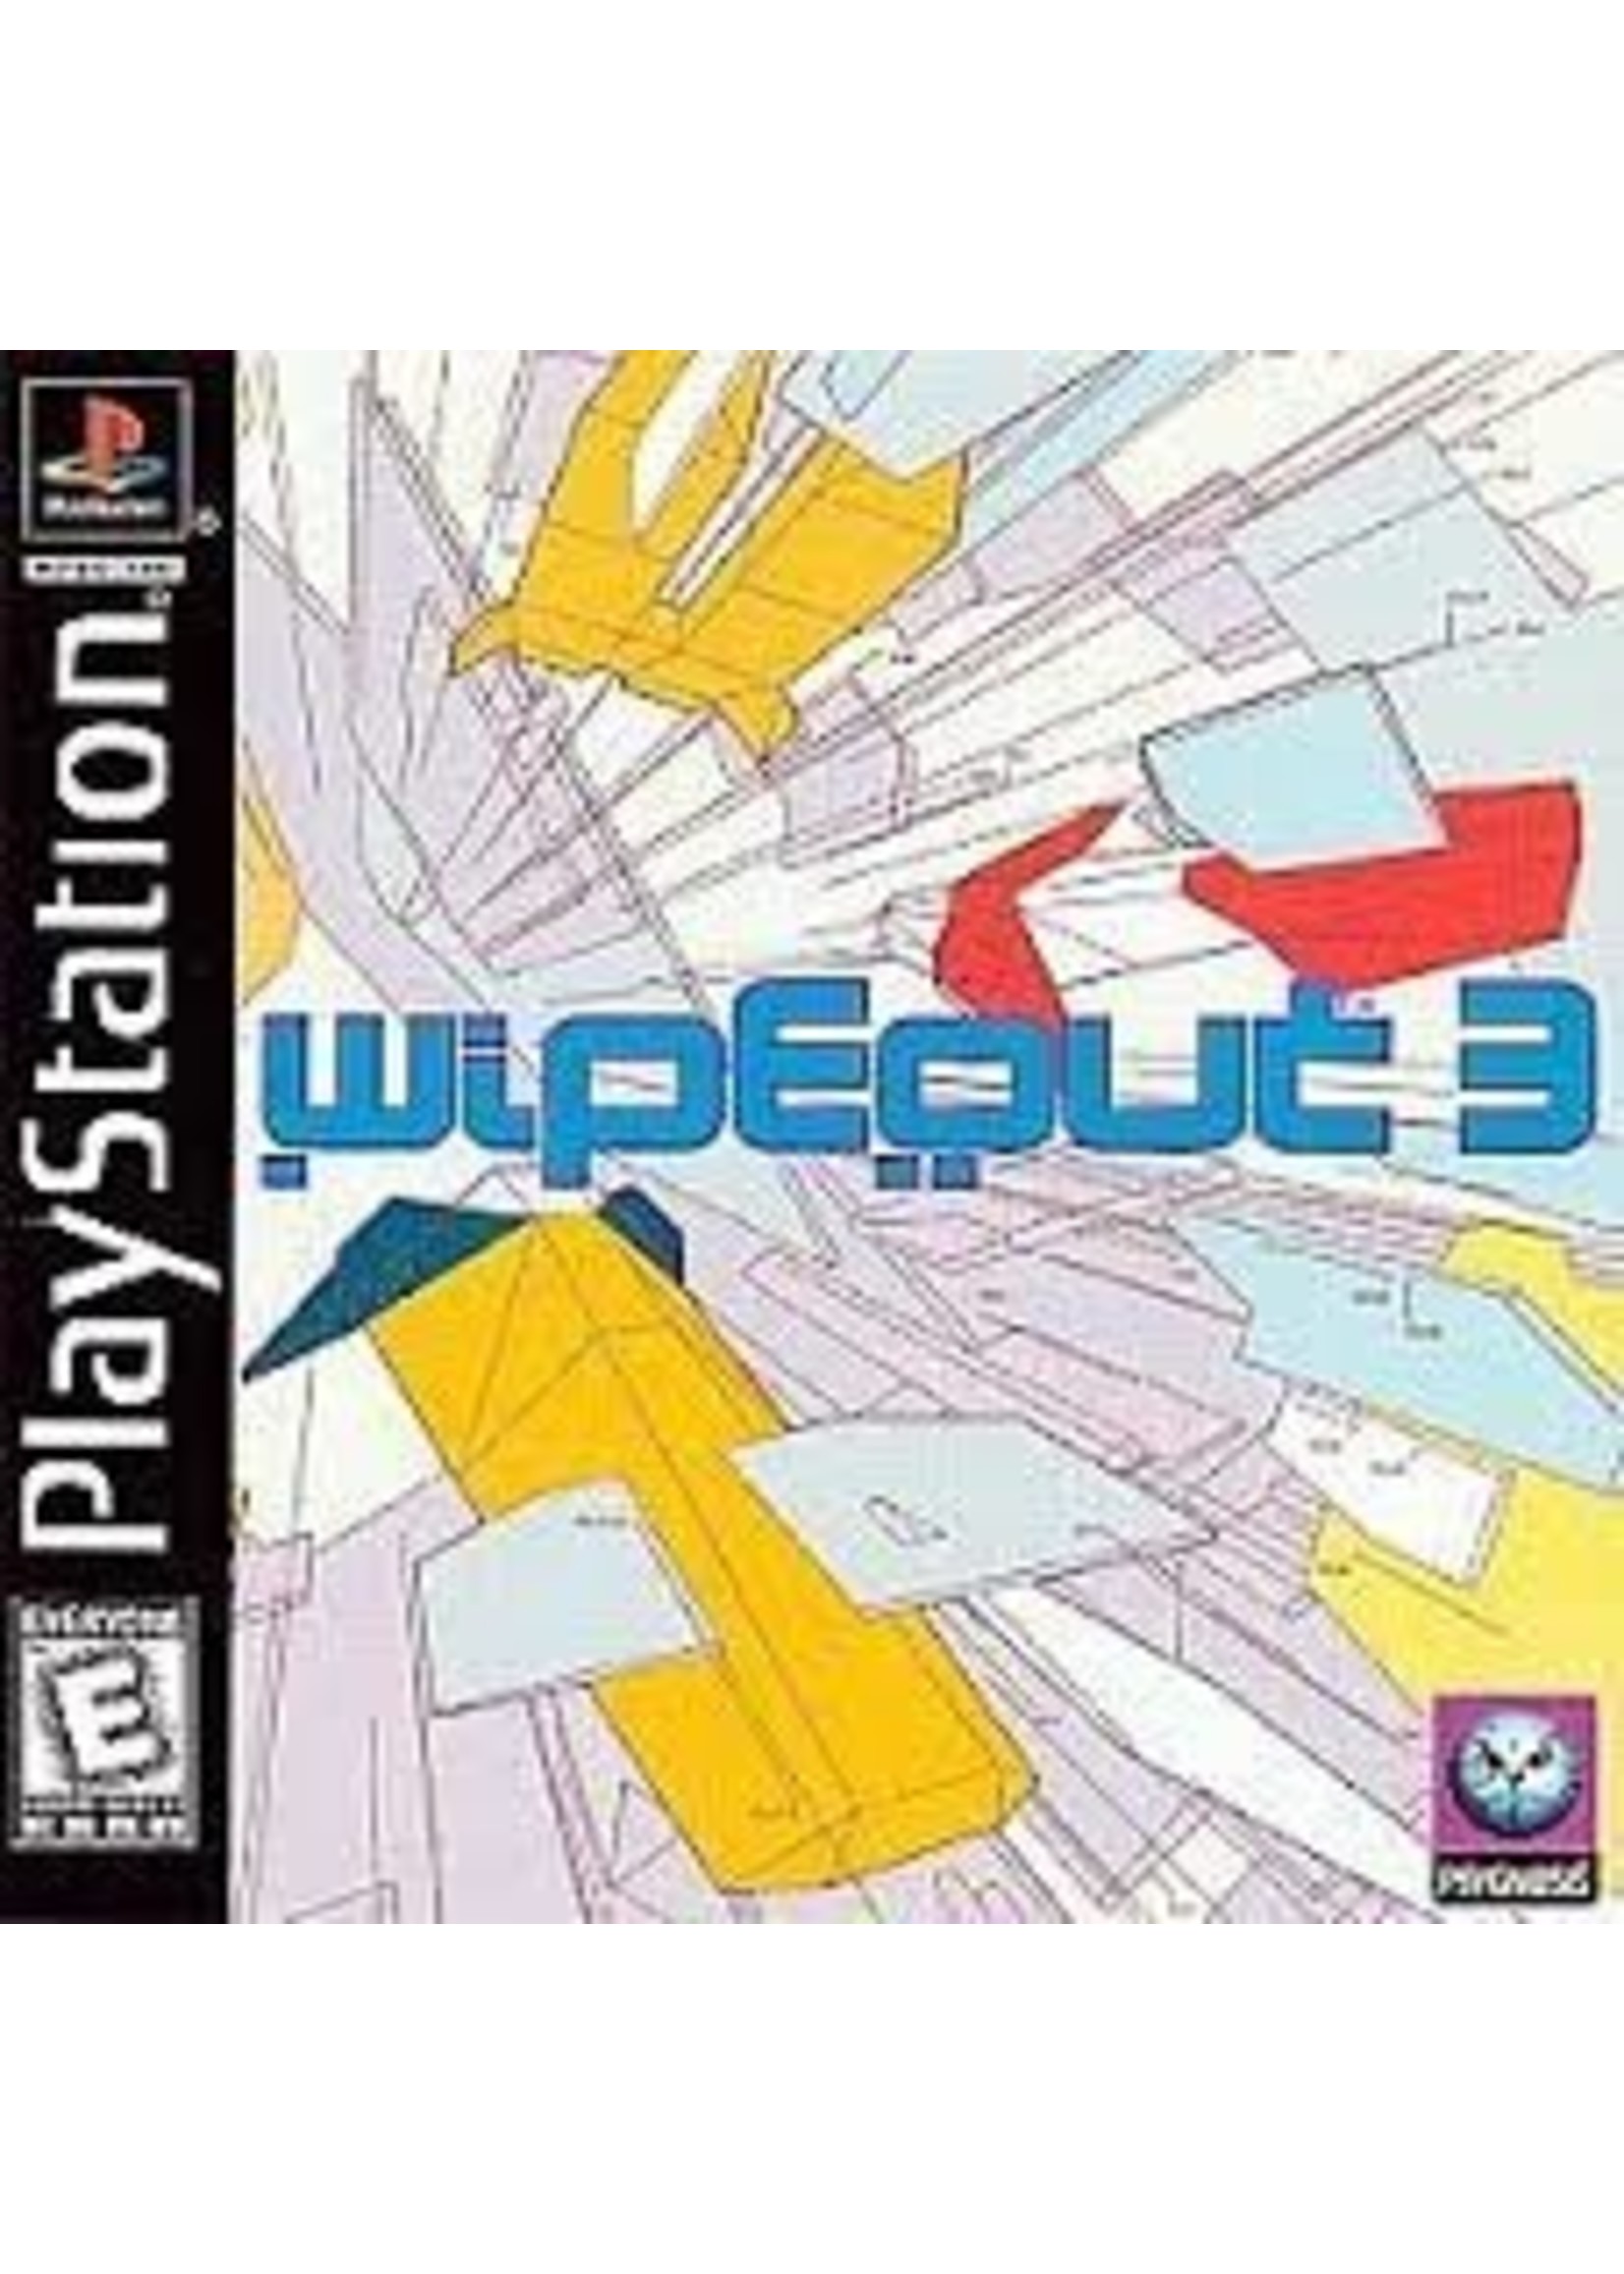 Sony Playstation 1 (PS1) Wipeout 3